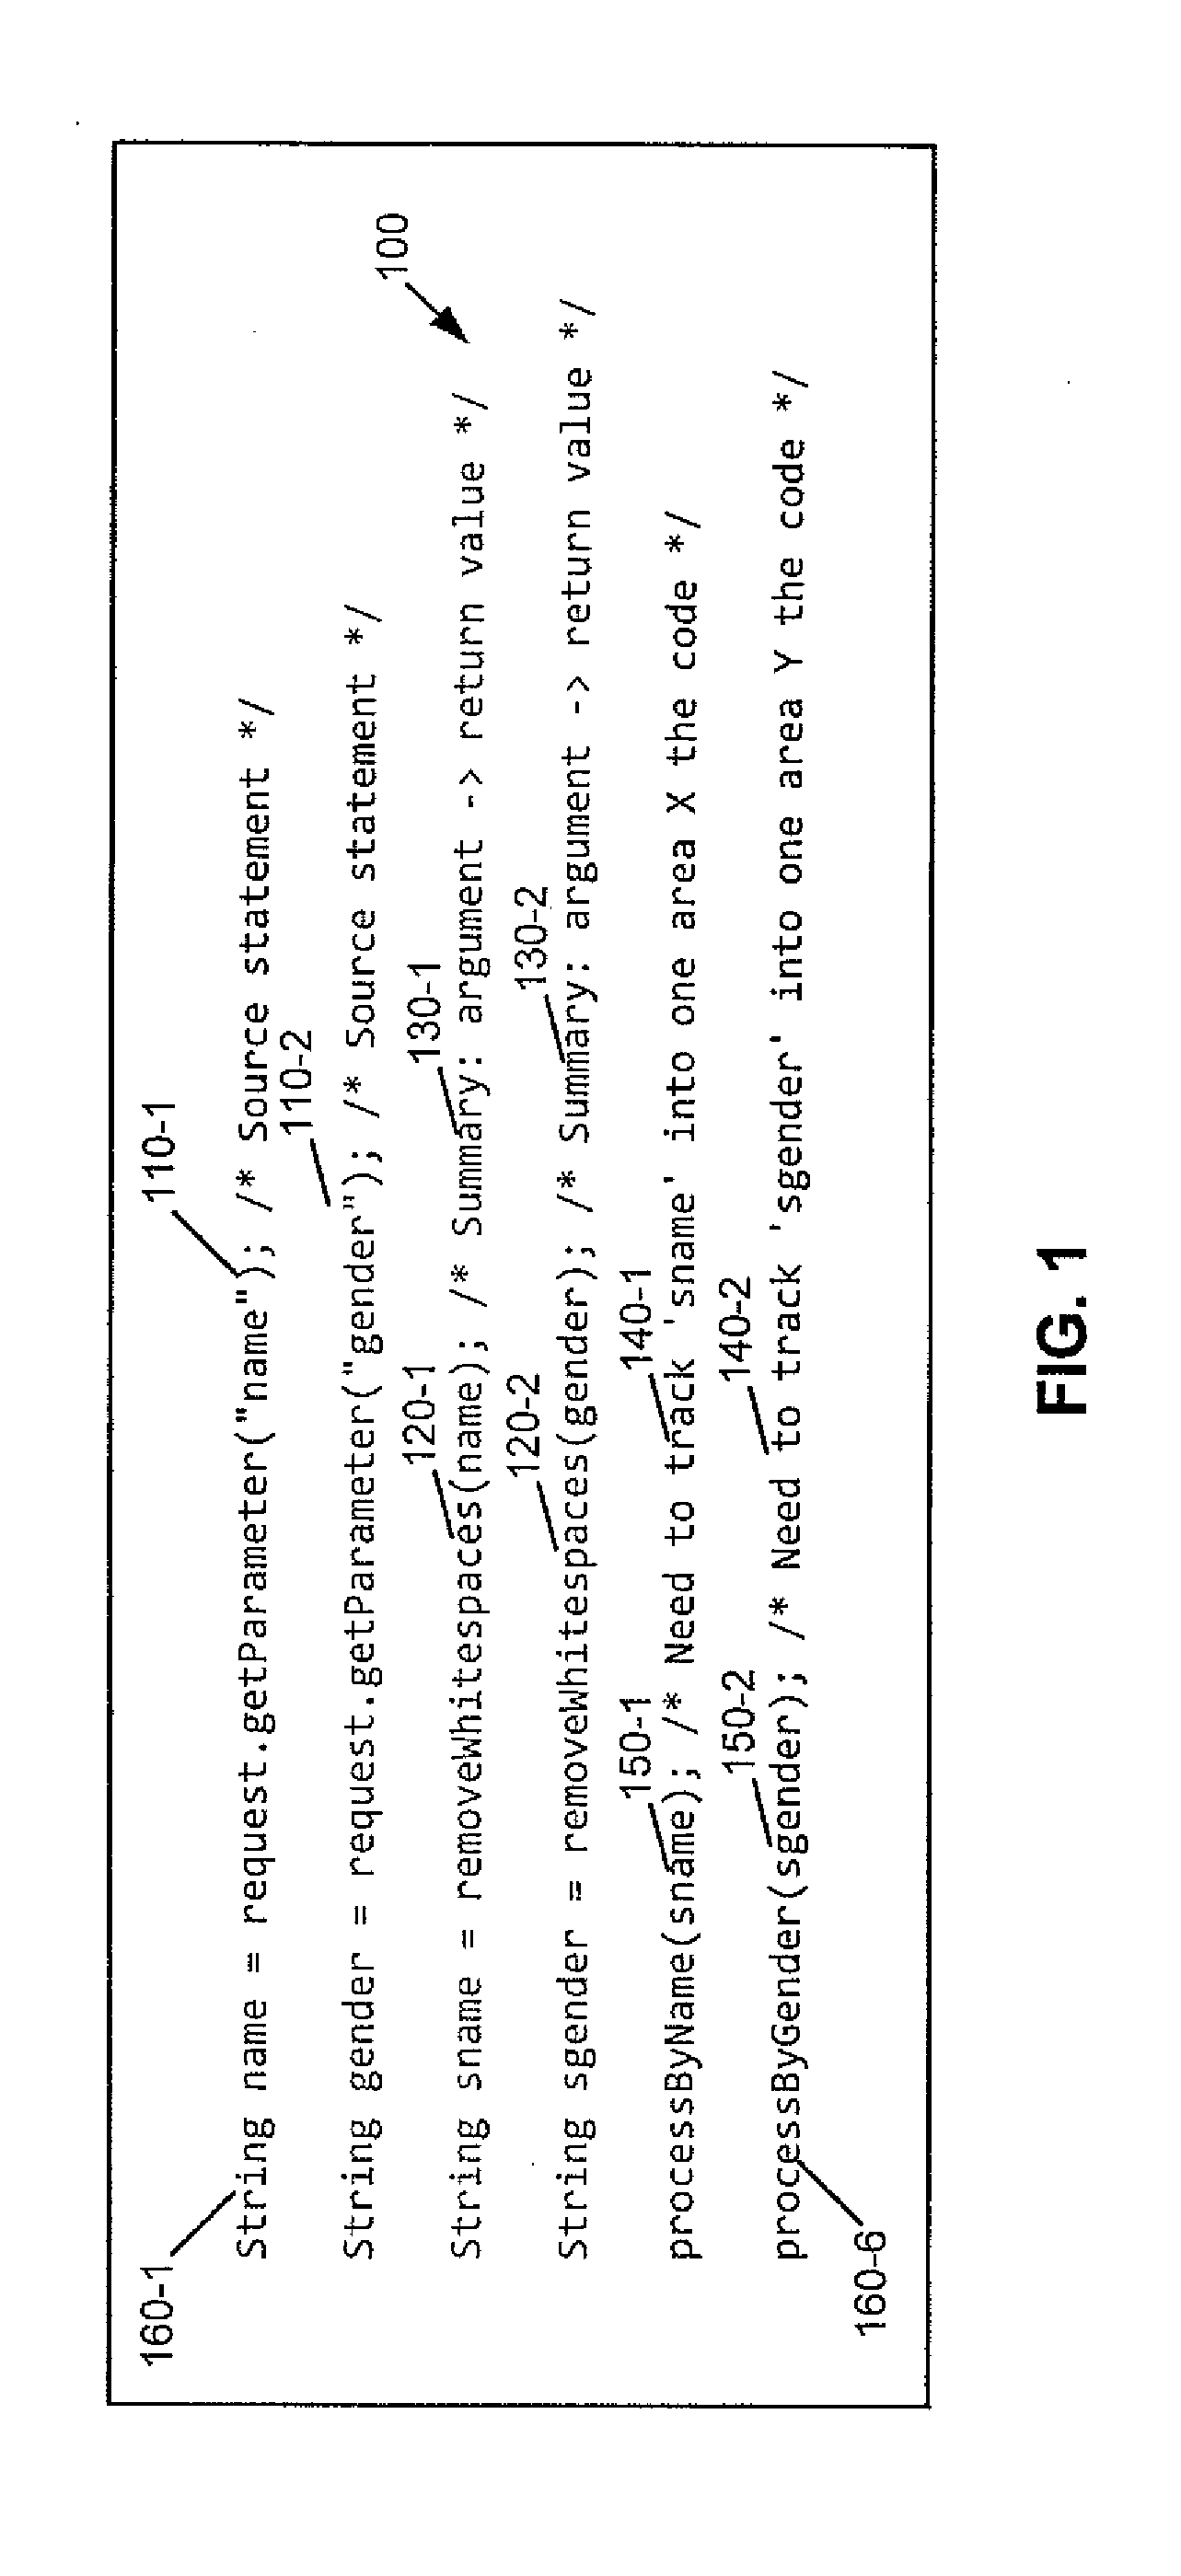 Partitioning of Program Analyses into Sub-Analyses Using Dynamic Hints